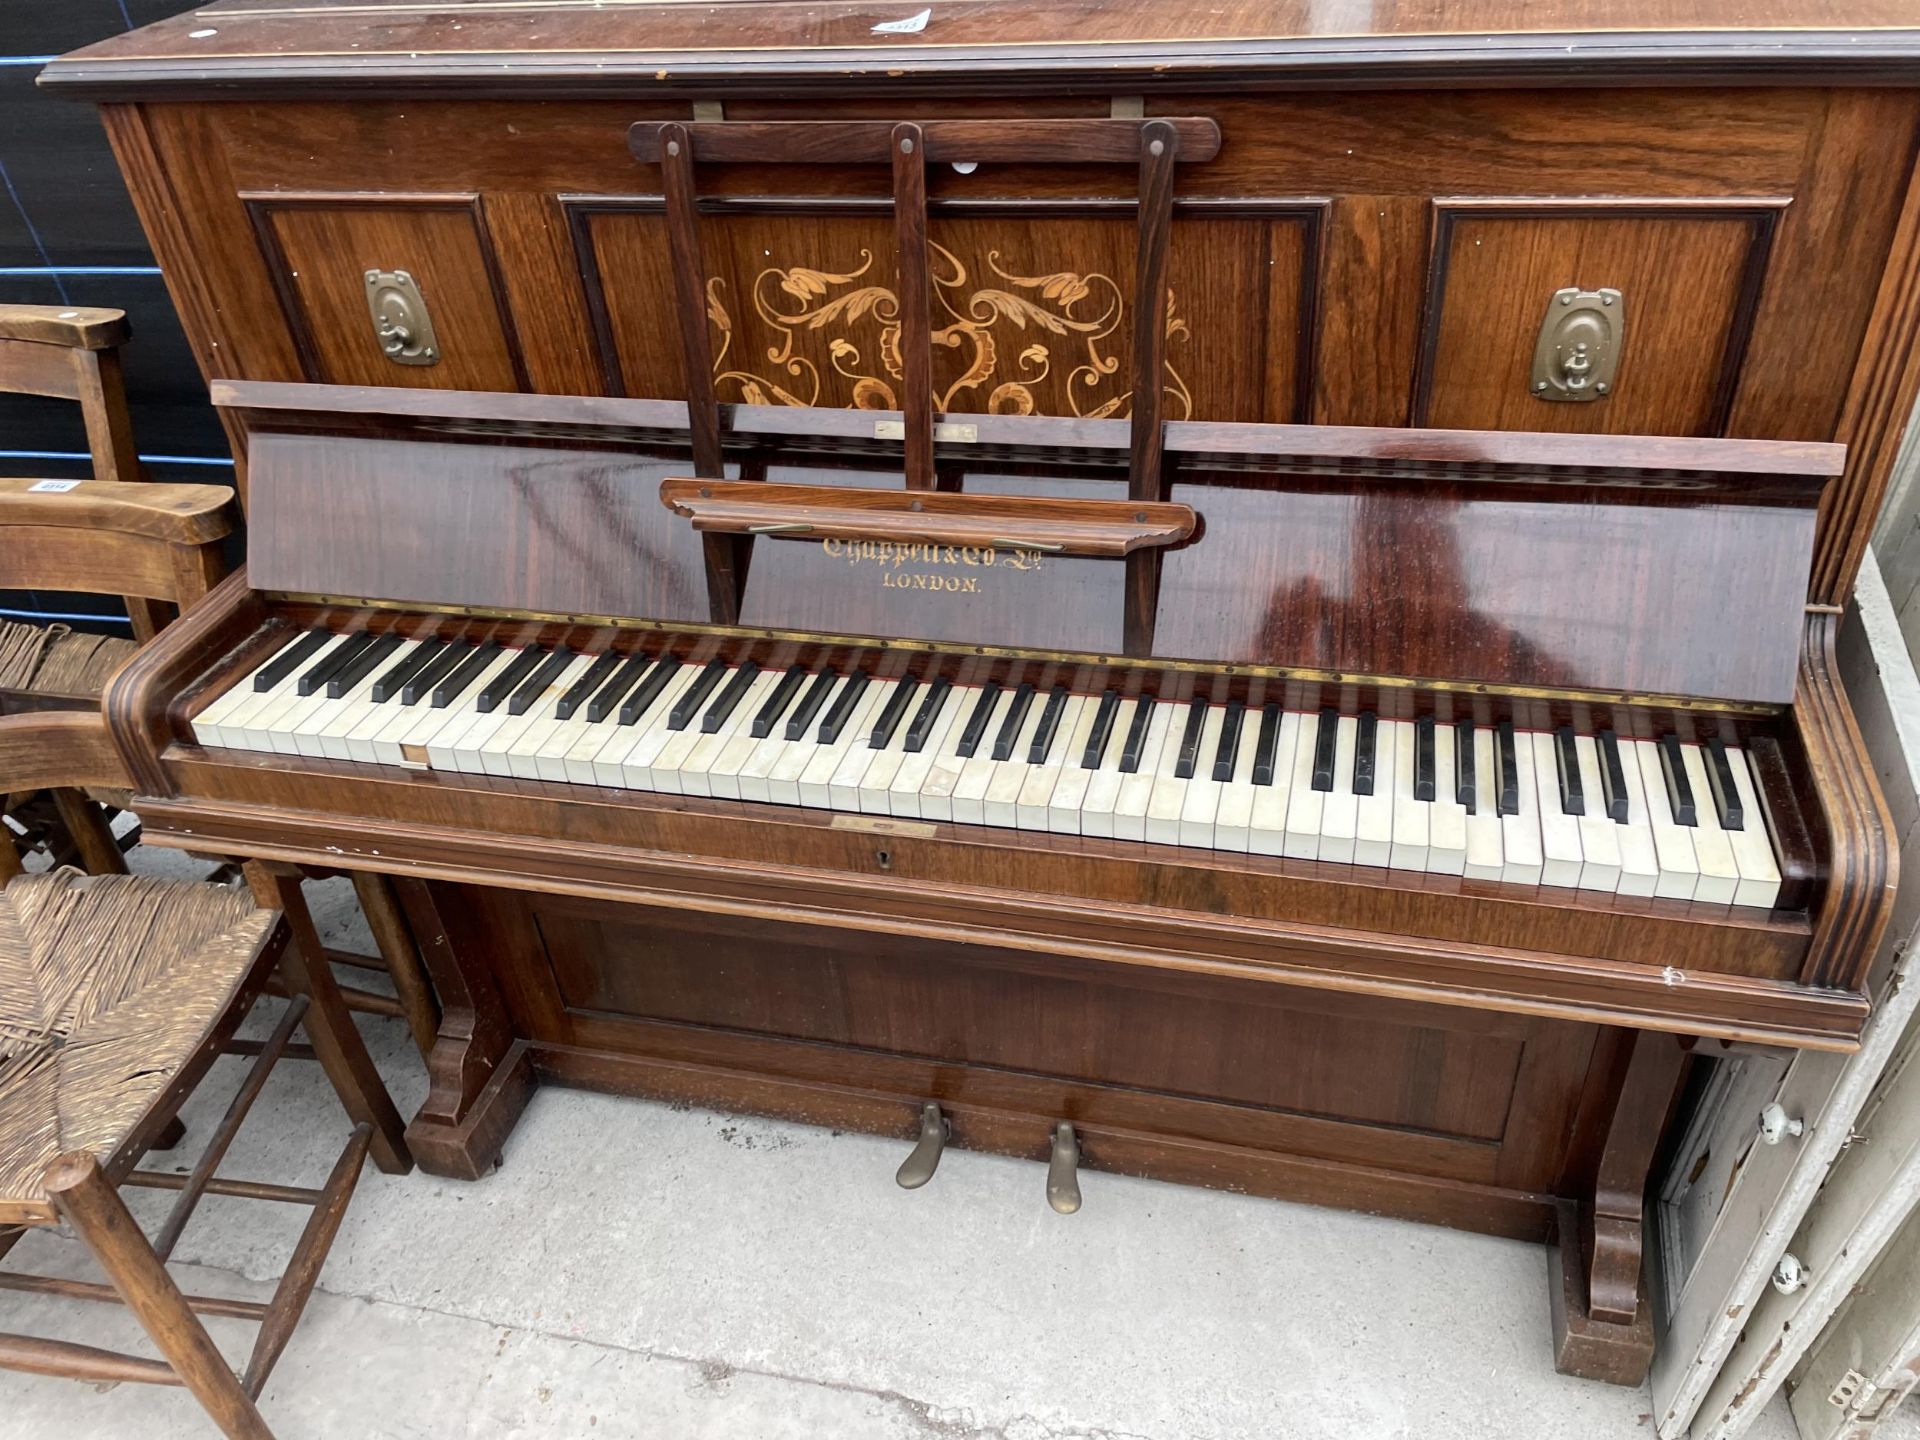 A CHAPPELL & CO LTD UPRIGHT PIANO STAMPED HARTSON & SON, NEWARK - Image 4 of 4